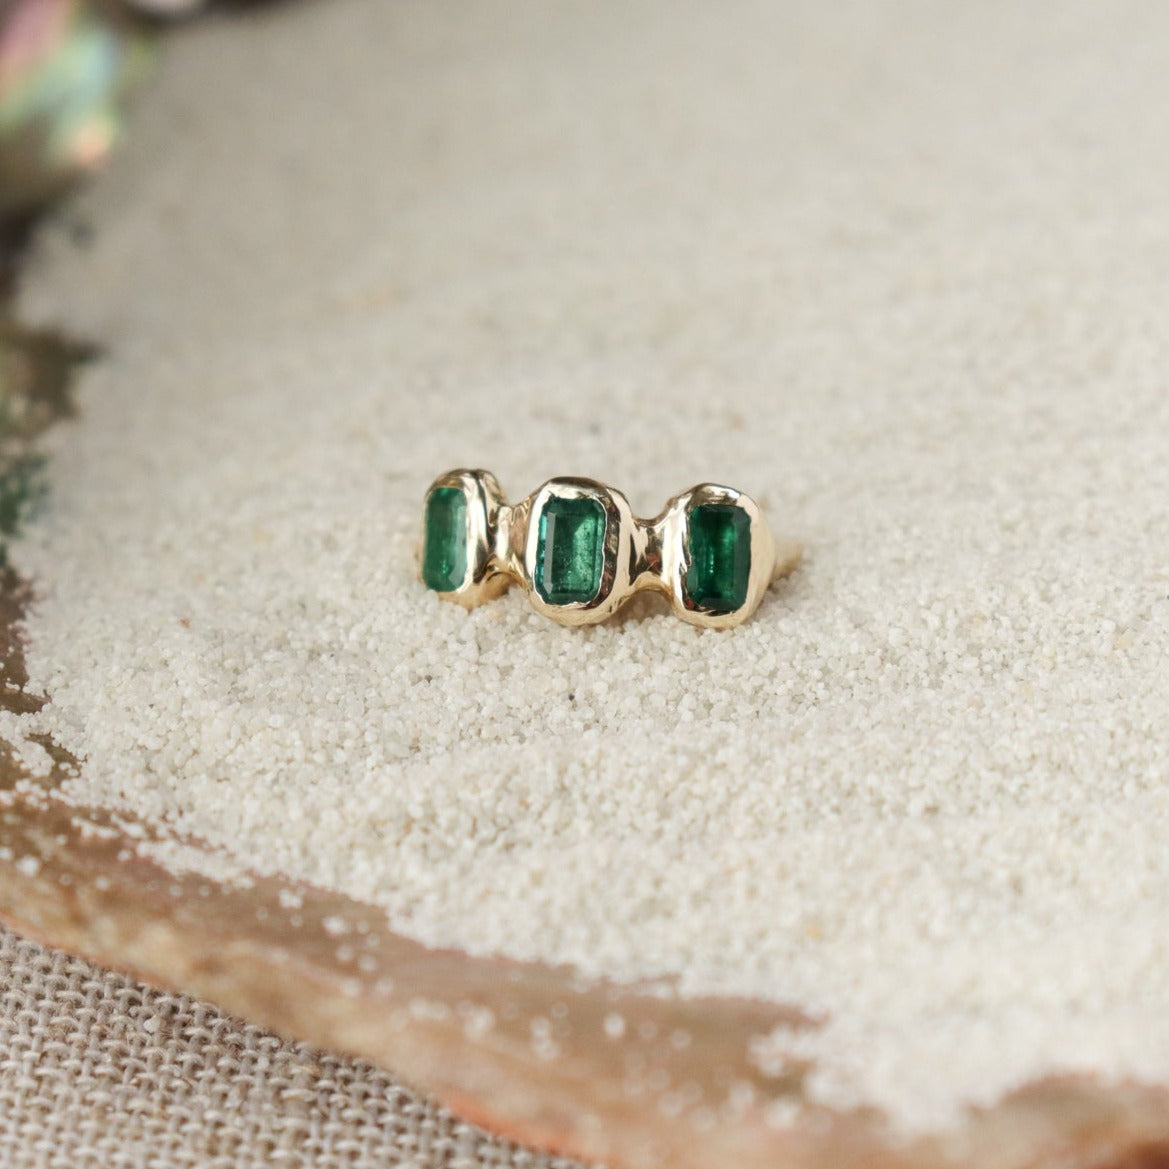 Three small emerald cut emeralds are embedded into a 14k gold ring giving it an organic look.